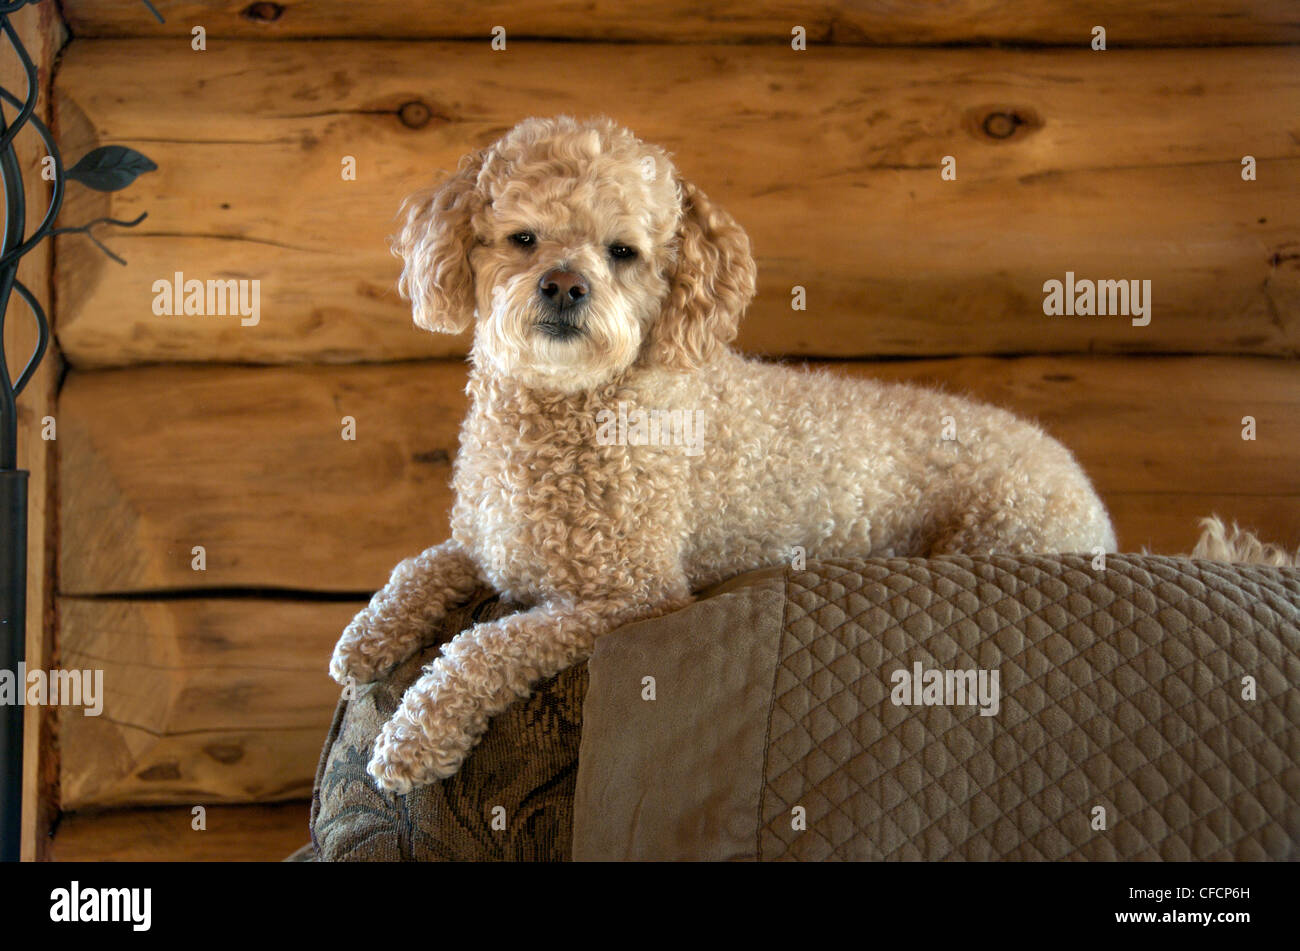 Mixed-breed Bichon-Poodle dog resting on back of a couch. Stock Photo